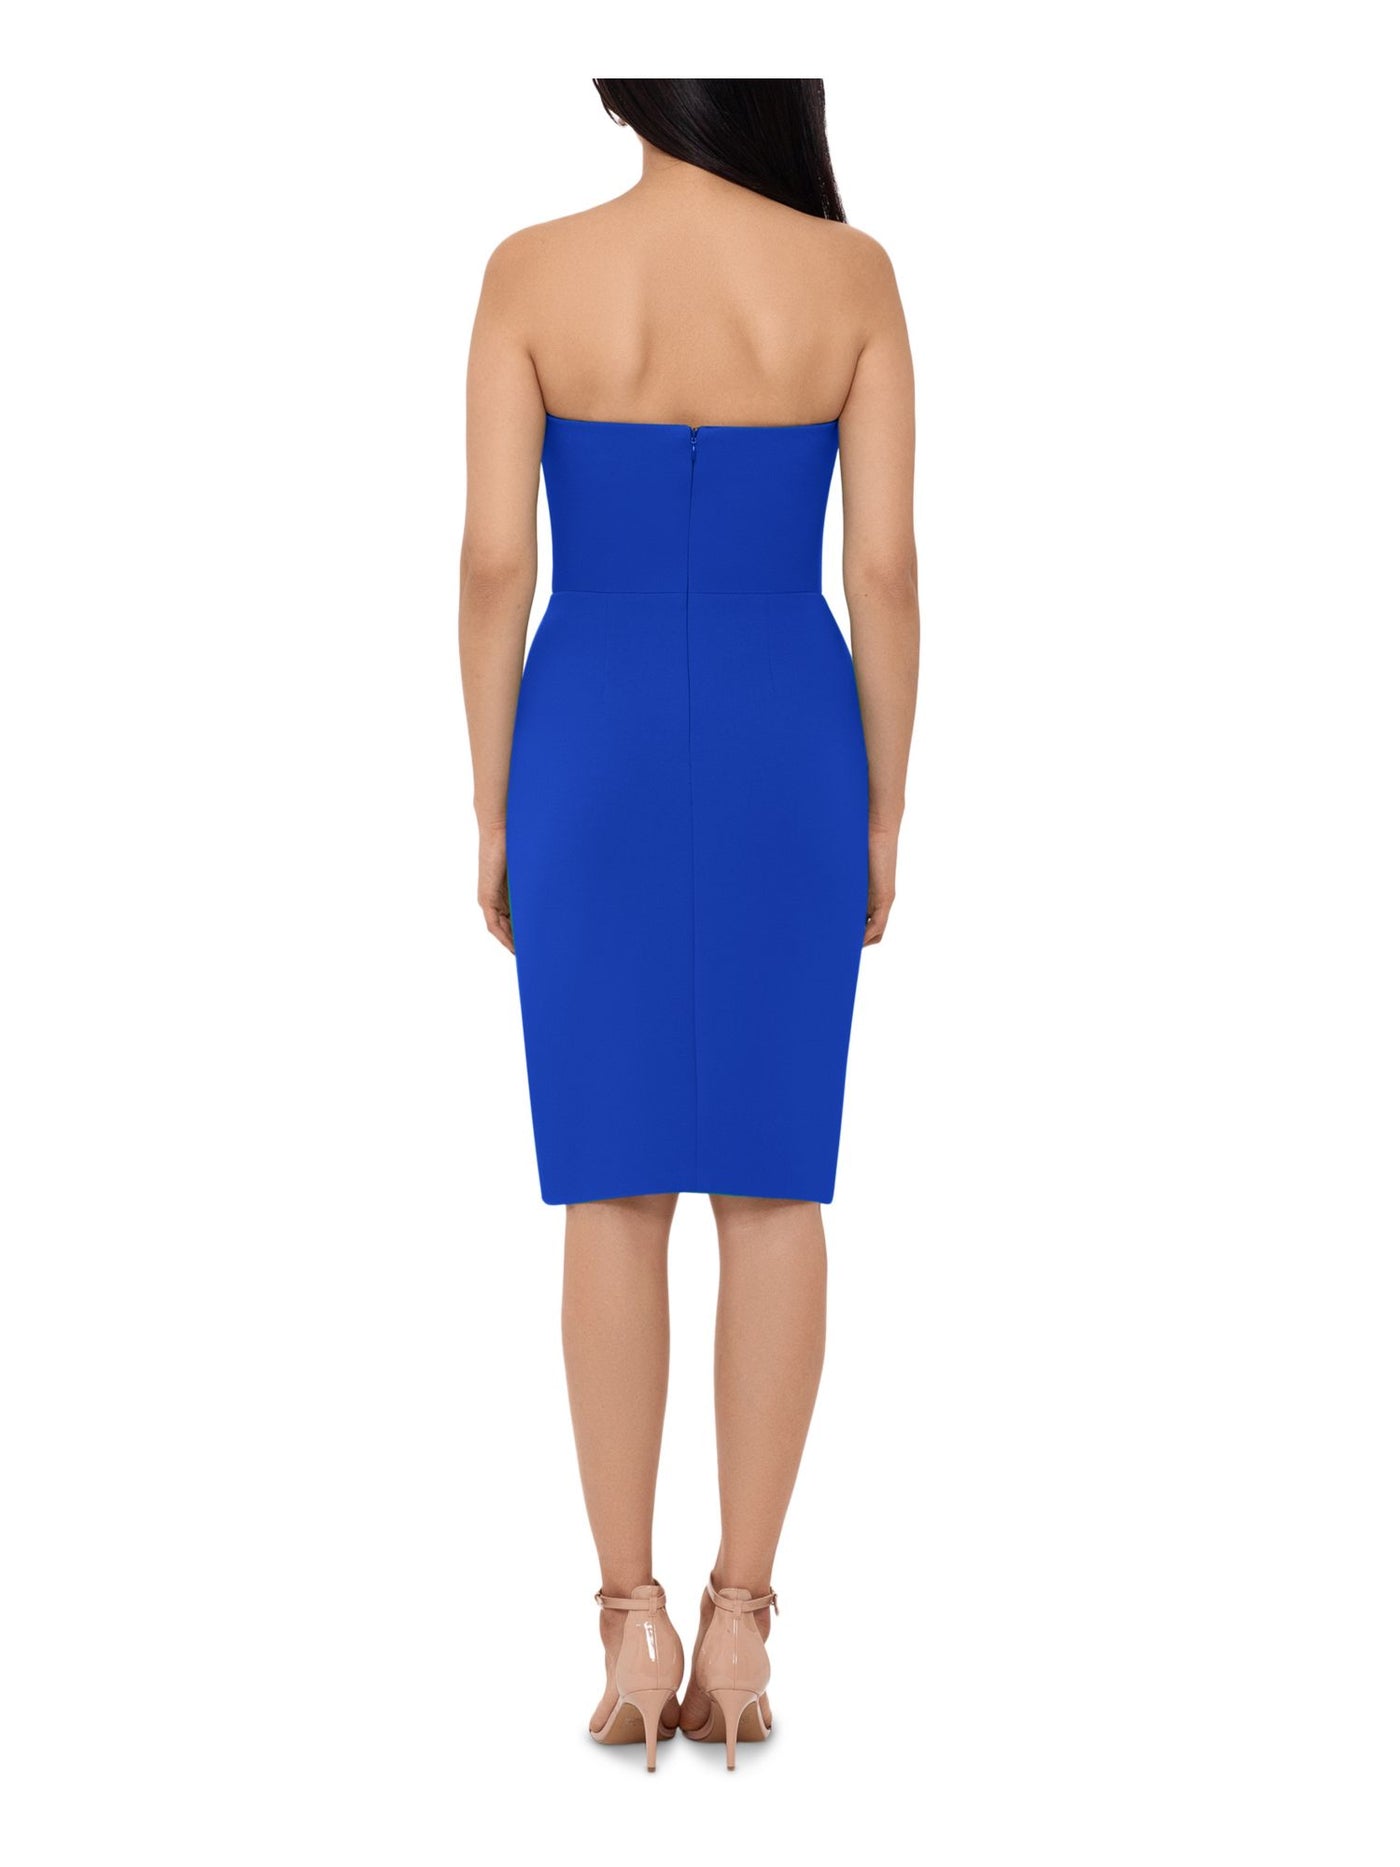 BETSY & ADAM Womens Blue Zippered Darted Side-ruffle Slitted Lined Sleeveless Strapless Knee Length Party Sheath Dress 4